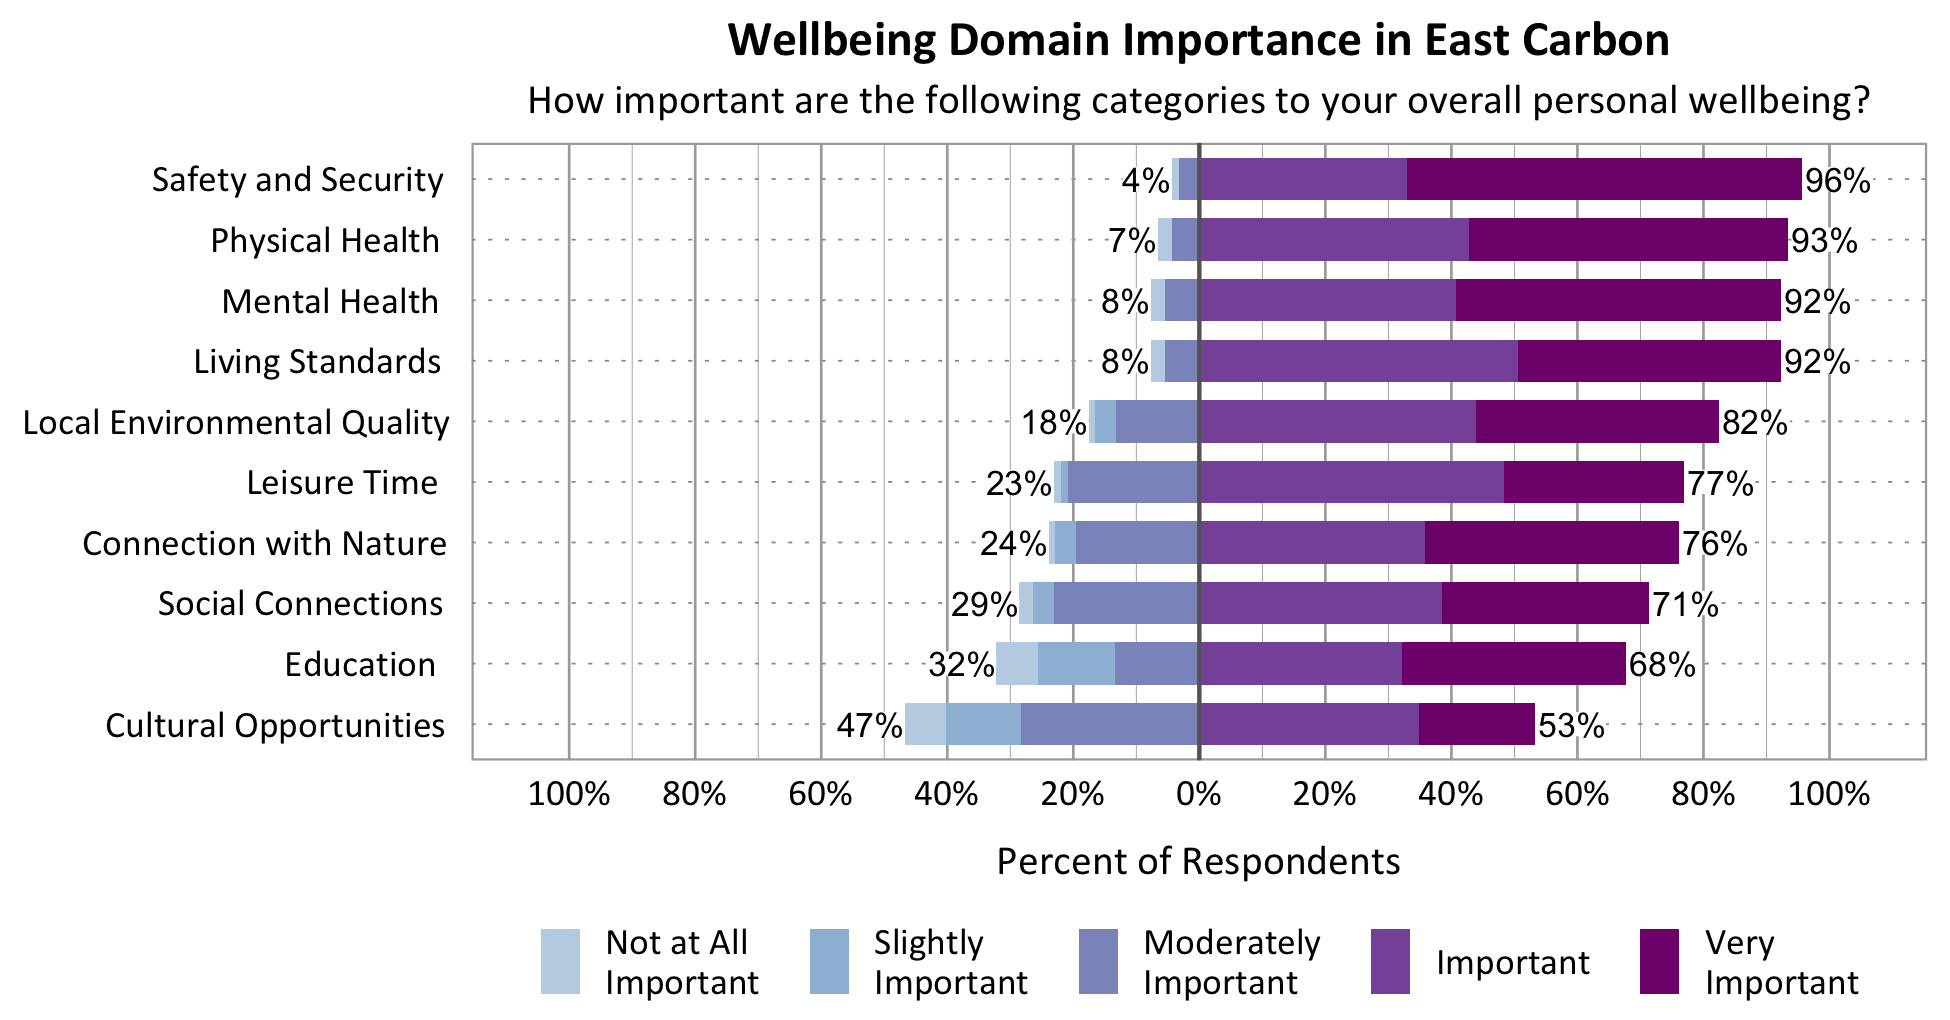 Likert Graph. Title: Wellbeing Domain Importance in East Carbon. Subtitle: How important are the following categories to your overall personal wellbeing? Physical Health - 7% of respondents rated as not at all important, slightly important, or moderately important while 93% rated as important or very important; Category: Safety and Security 4% of respondents rated as not at all important, slightly important, or moderately important while 96% rated as important or very important; Category: Mental Health - 8% of respondents rated as not at all important, slightly important, or moderately important while 92% rated as important or very important; Category: Living Standards - 8% of respondents rated as not at all important, slightly important, or moderately important while 92% rated as important or very important; Category: Local Environmental Quality - 18% of respondents rated as not at all important, slightly important, or moderately important while 82% of respondents rated as important or very important; Category: Leisure Time - 23% of respondents rated as not at all important, slightly important, or moderately important while 77% rated as important or very important; Category: Connection with Nature - 24% of respondents rated as not at all important, slightly important, or moderately important while 76% rated as important or very important; Category: Education - 32% of respondents rated as not at all important, slightly important, or moderately important while 68% rated as important or very important; Category: Social Connections - 29% rated as not at all important, slightly important, or moderately important while 71% rated as important or very important; Category: Cultural Opportunities - 47% rated as not at all important, slightly important, or moderately important while 53% rated as important or very important.